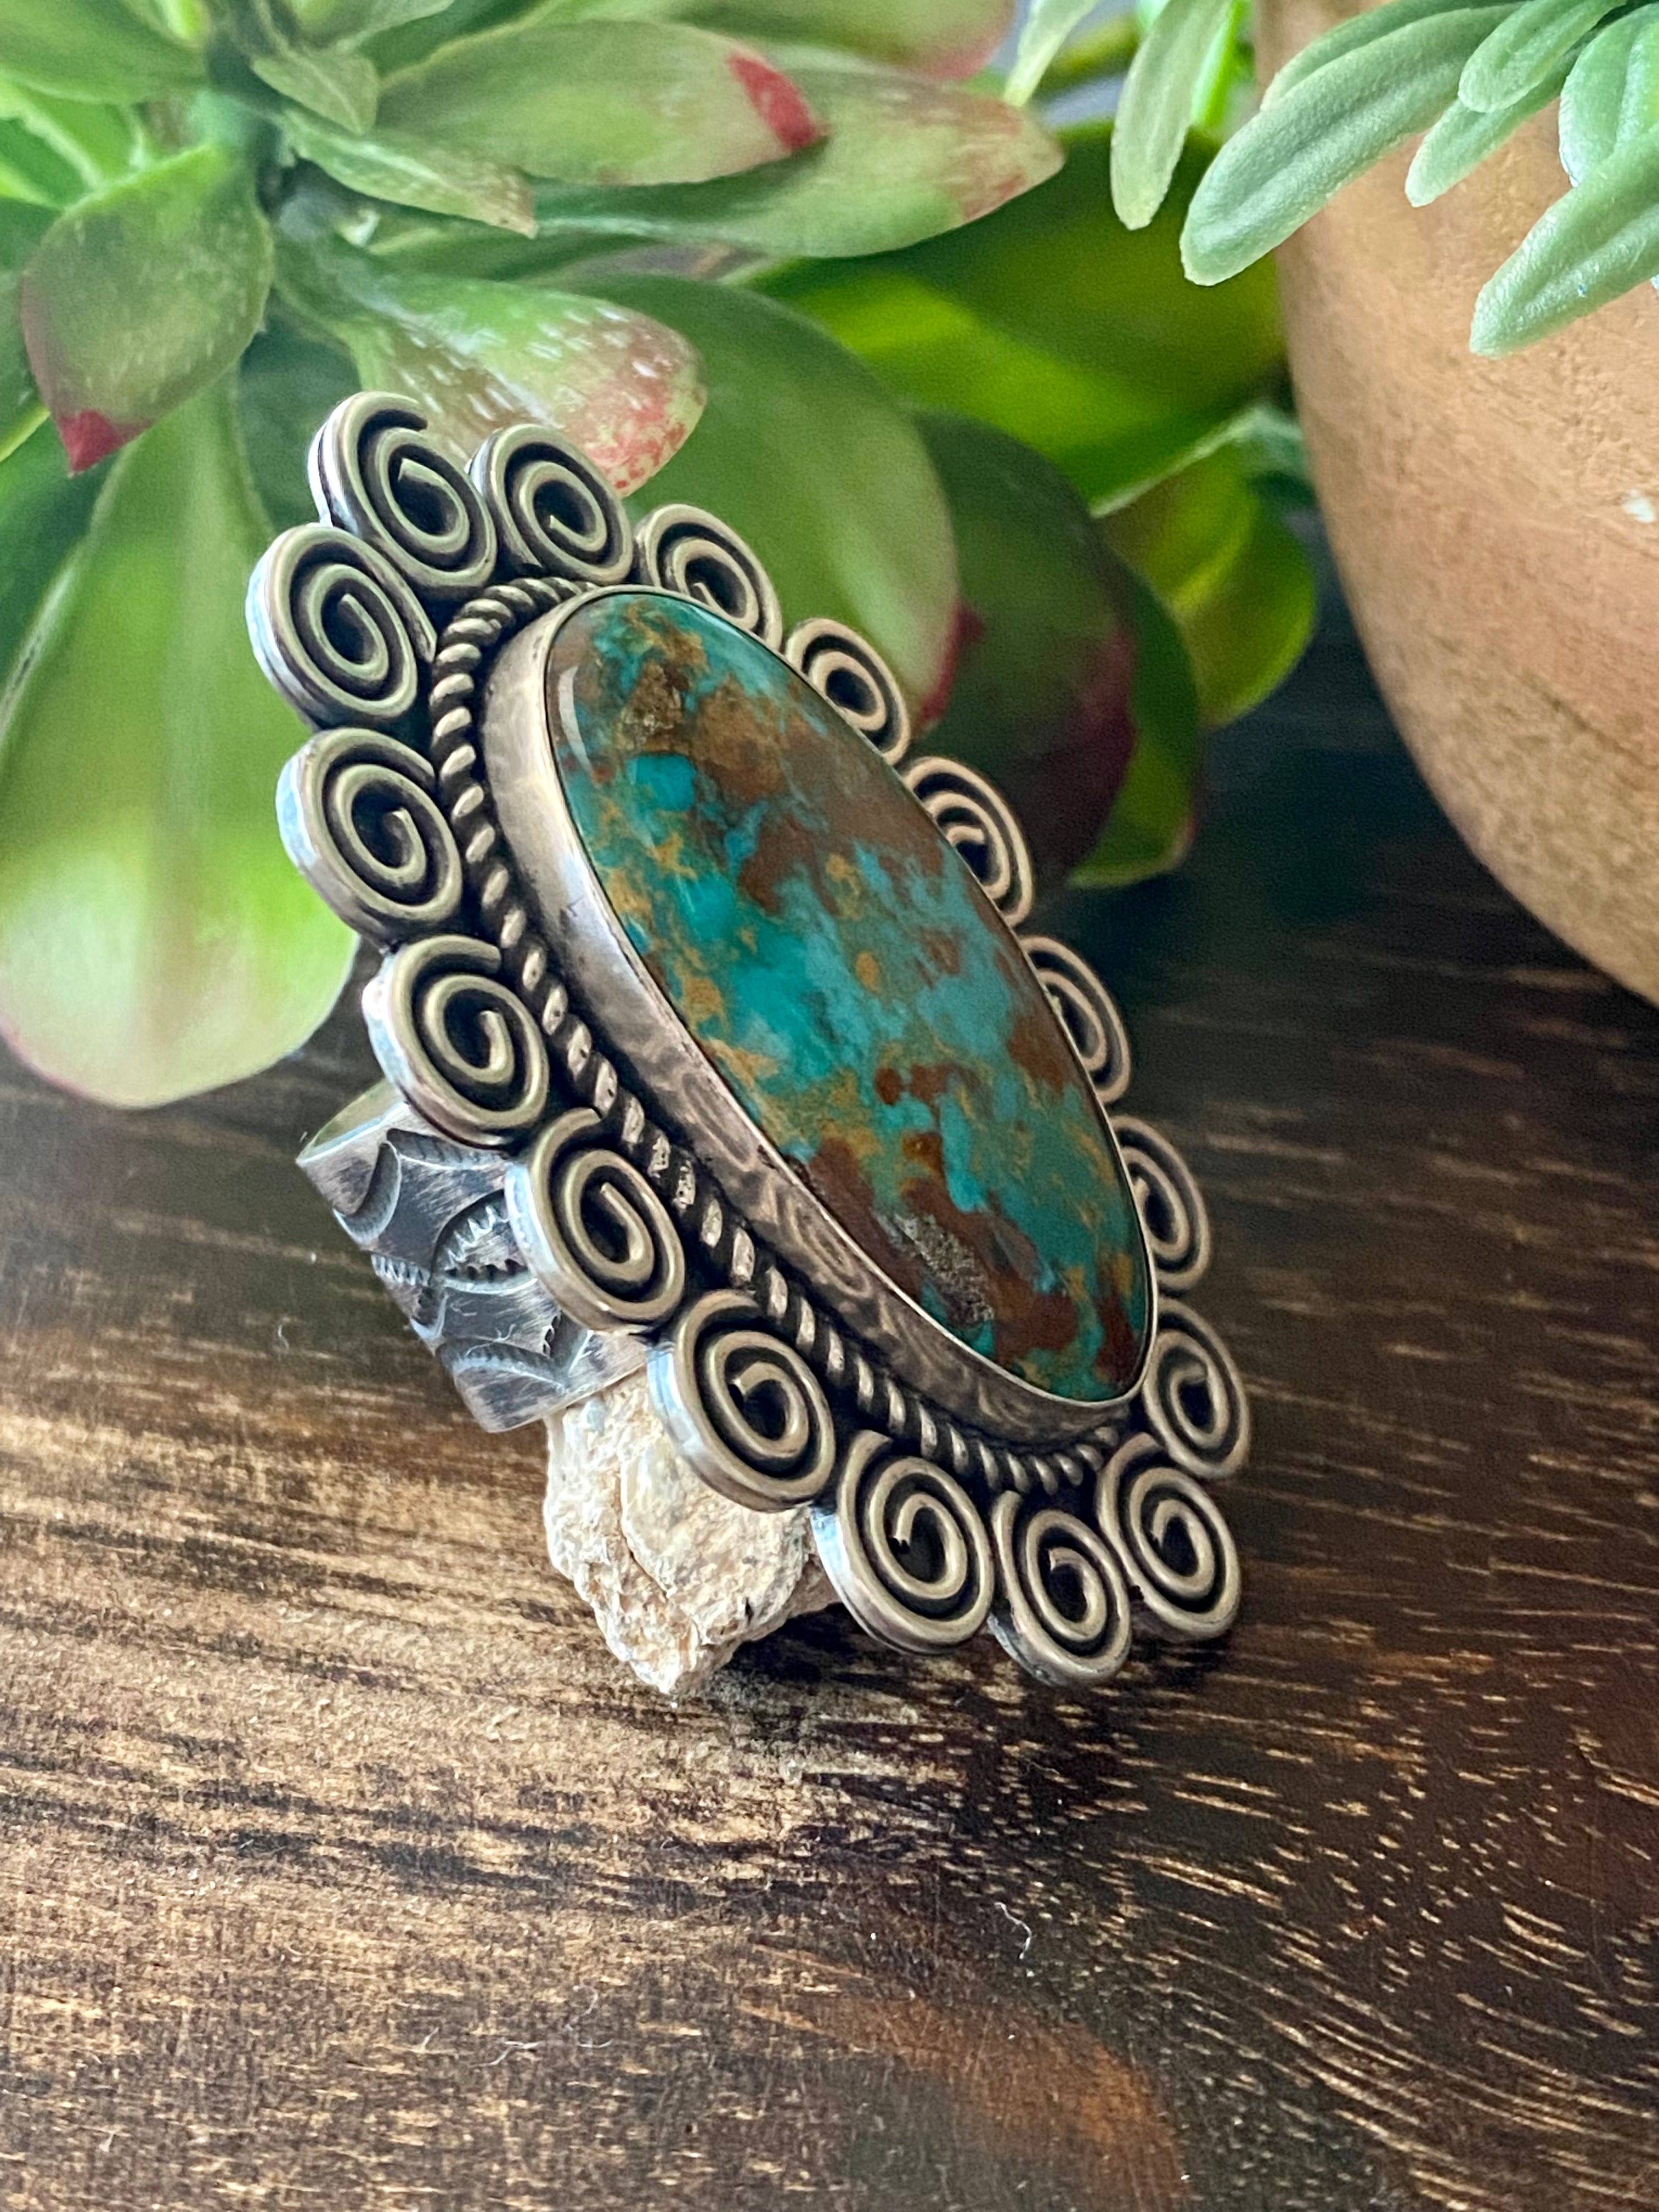 Alex Sanchez Kings Manassa Turquoise & Sterling Silver Ring Size 9.5